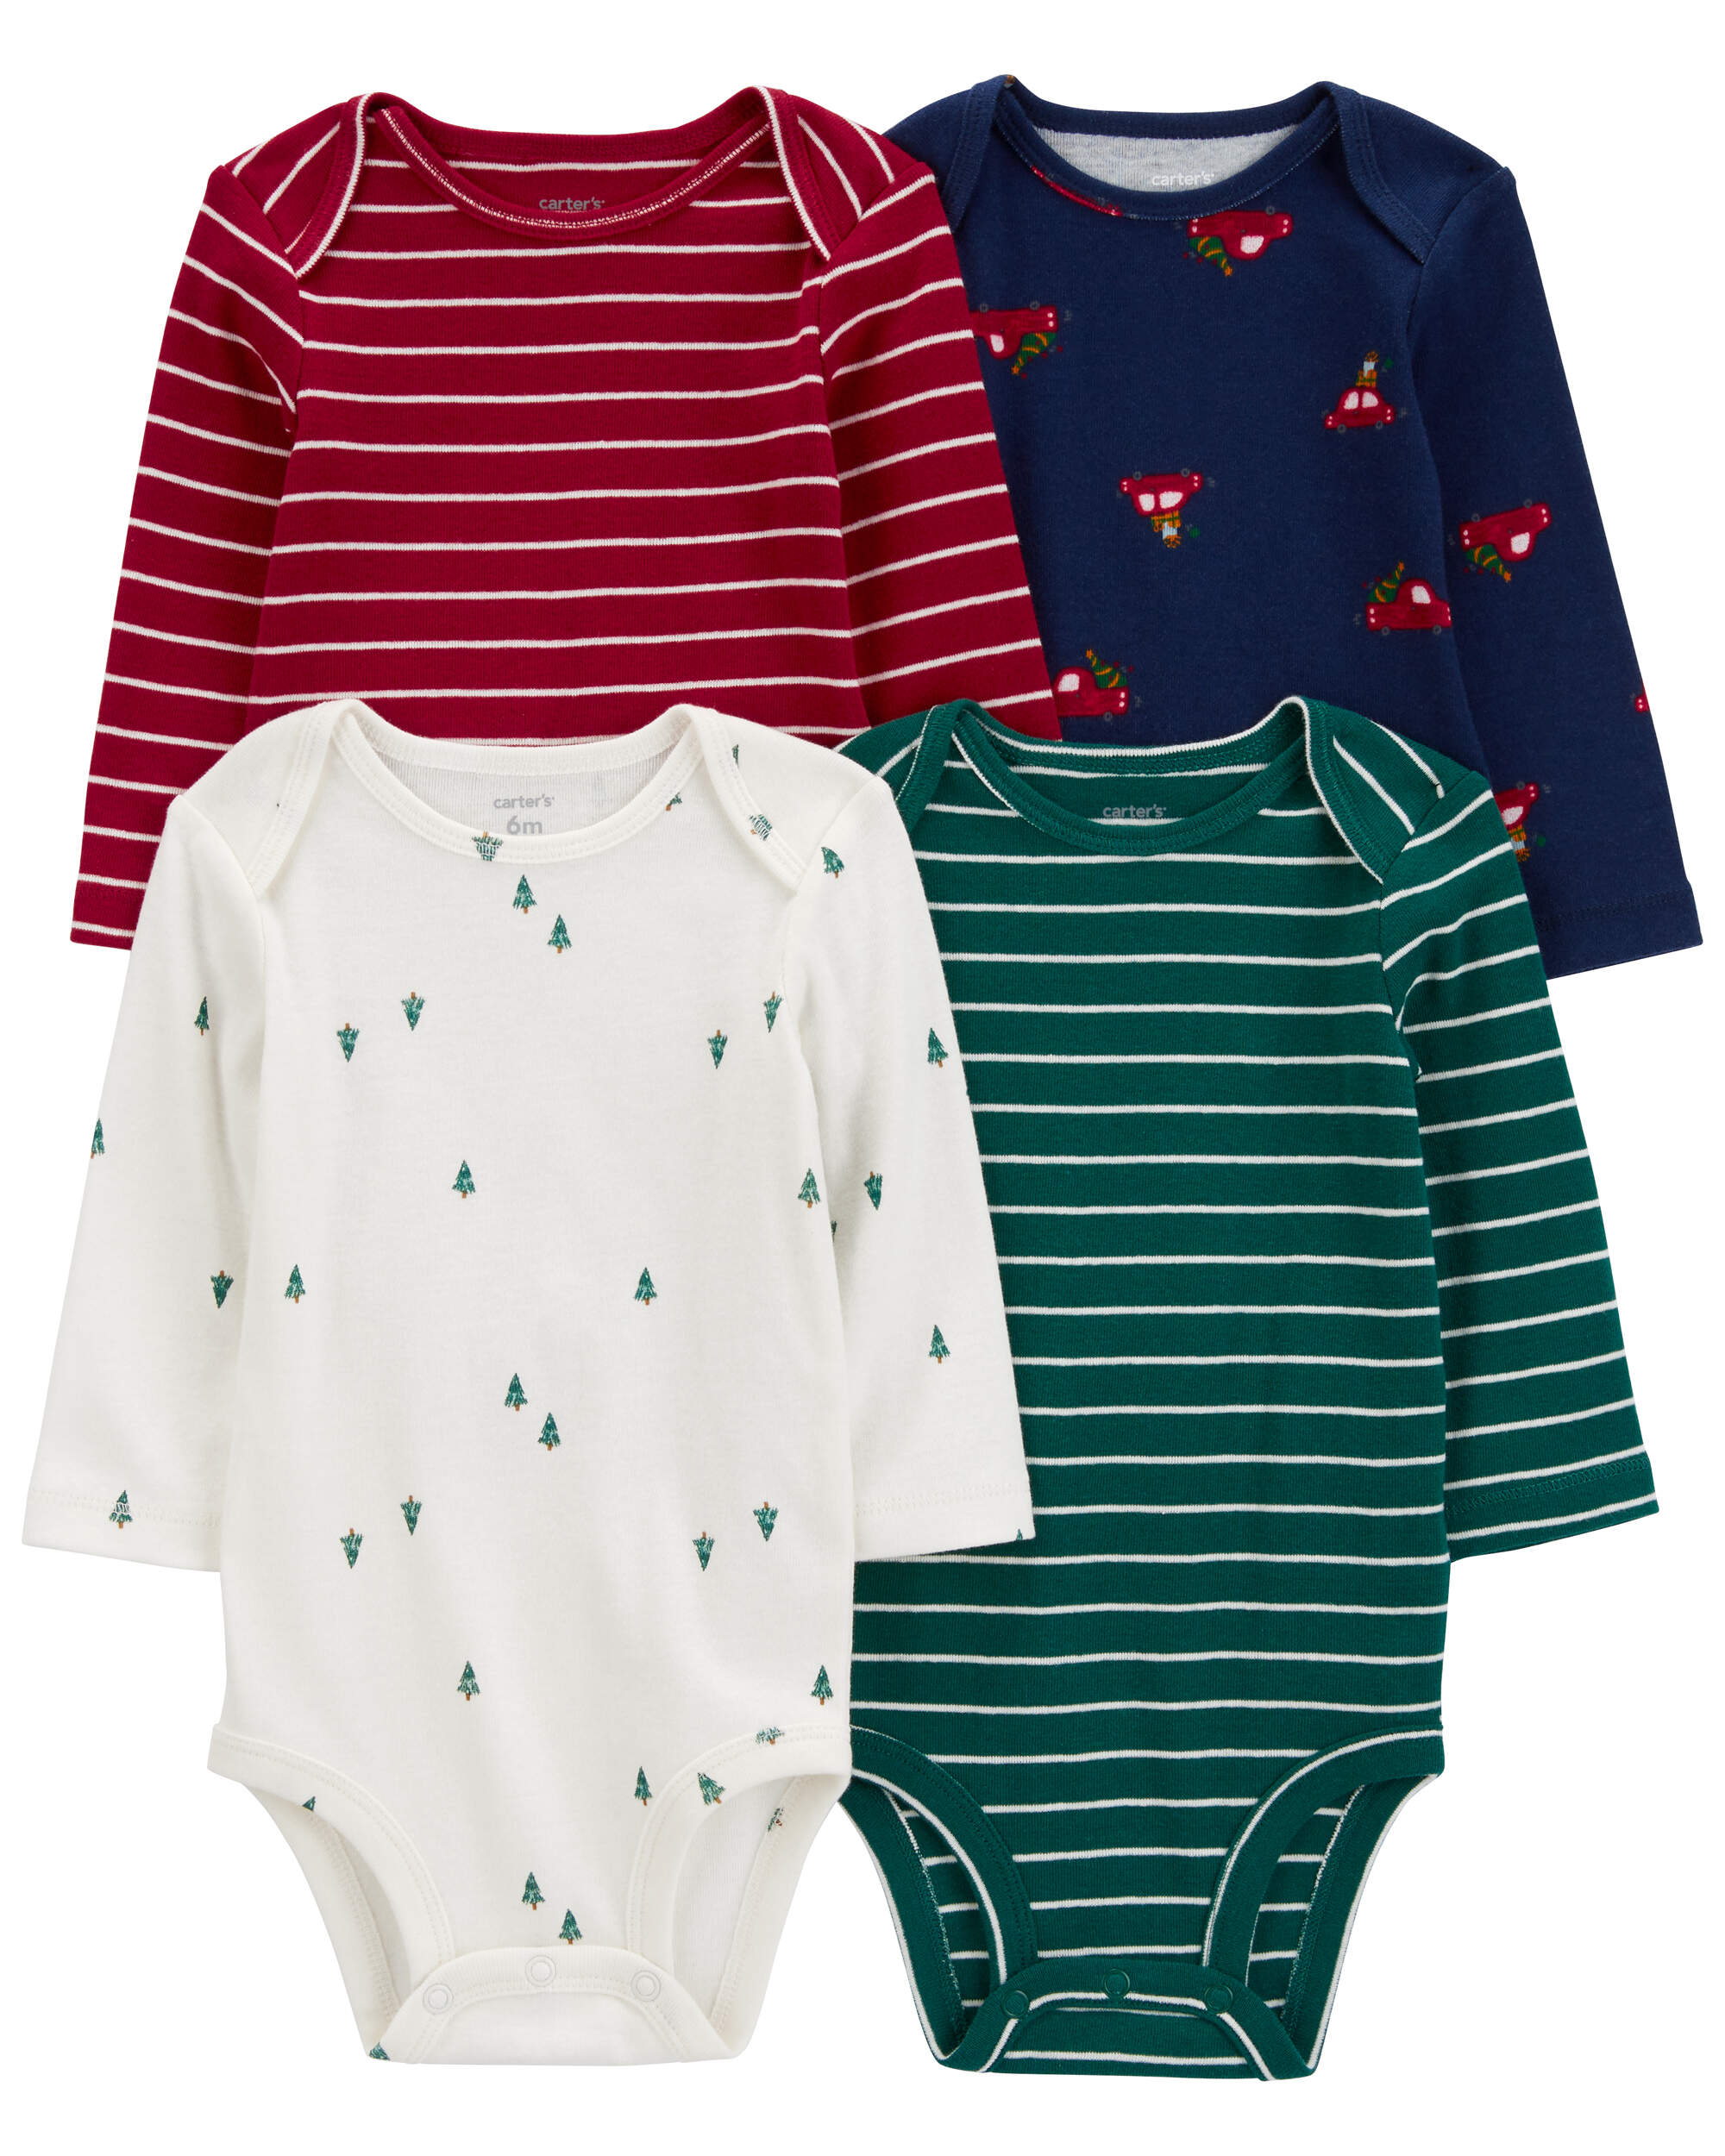 Baby 4-Pack Long-Sleeve Holiday Bodysuits